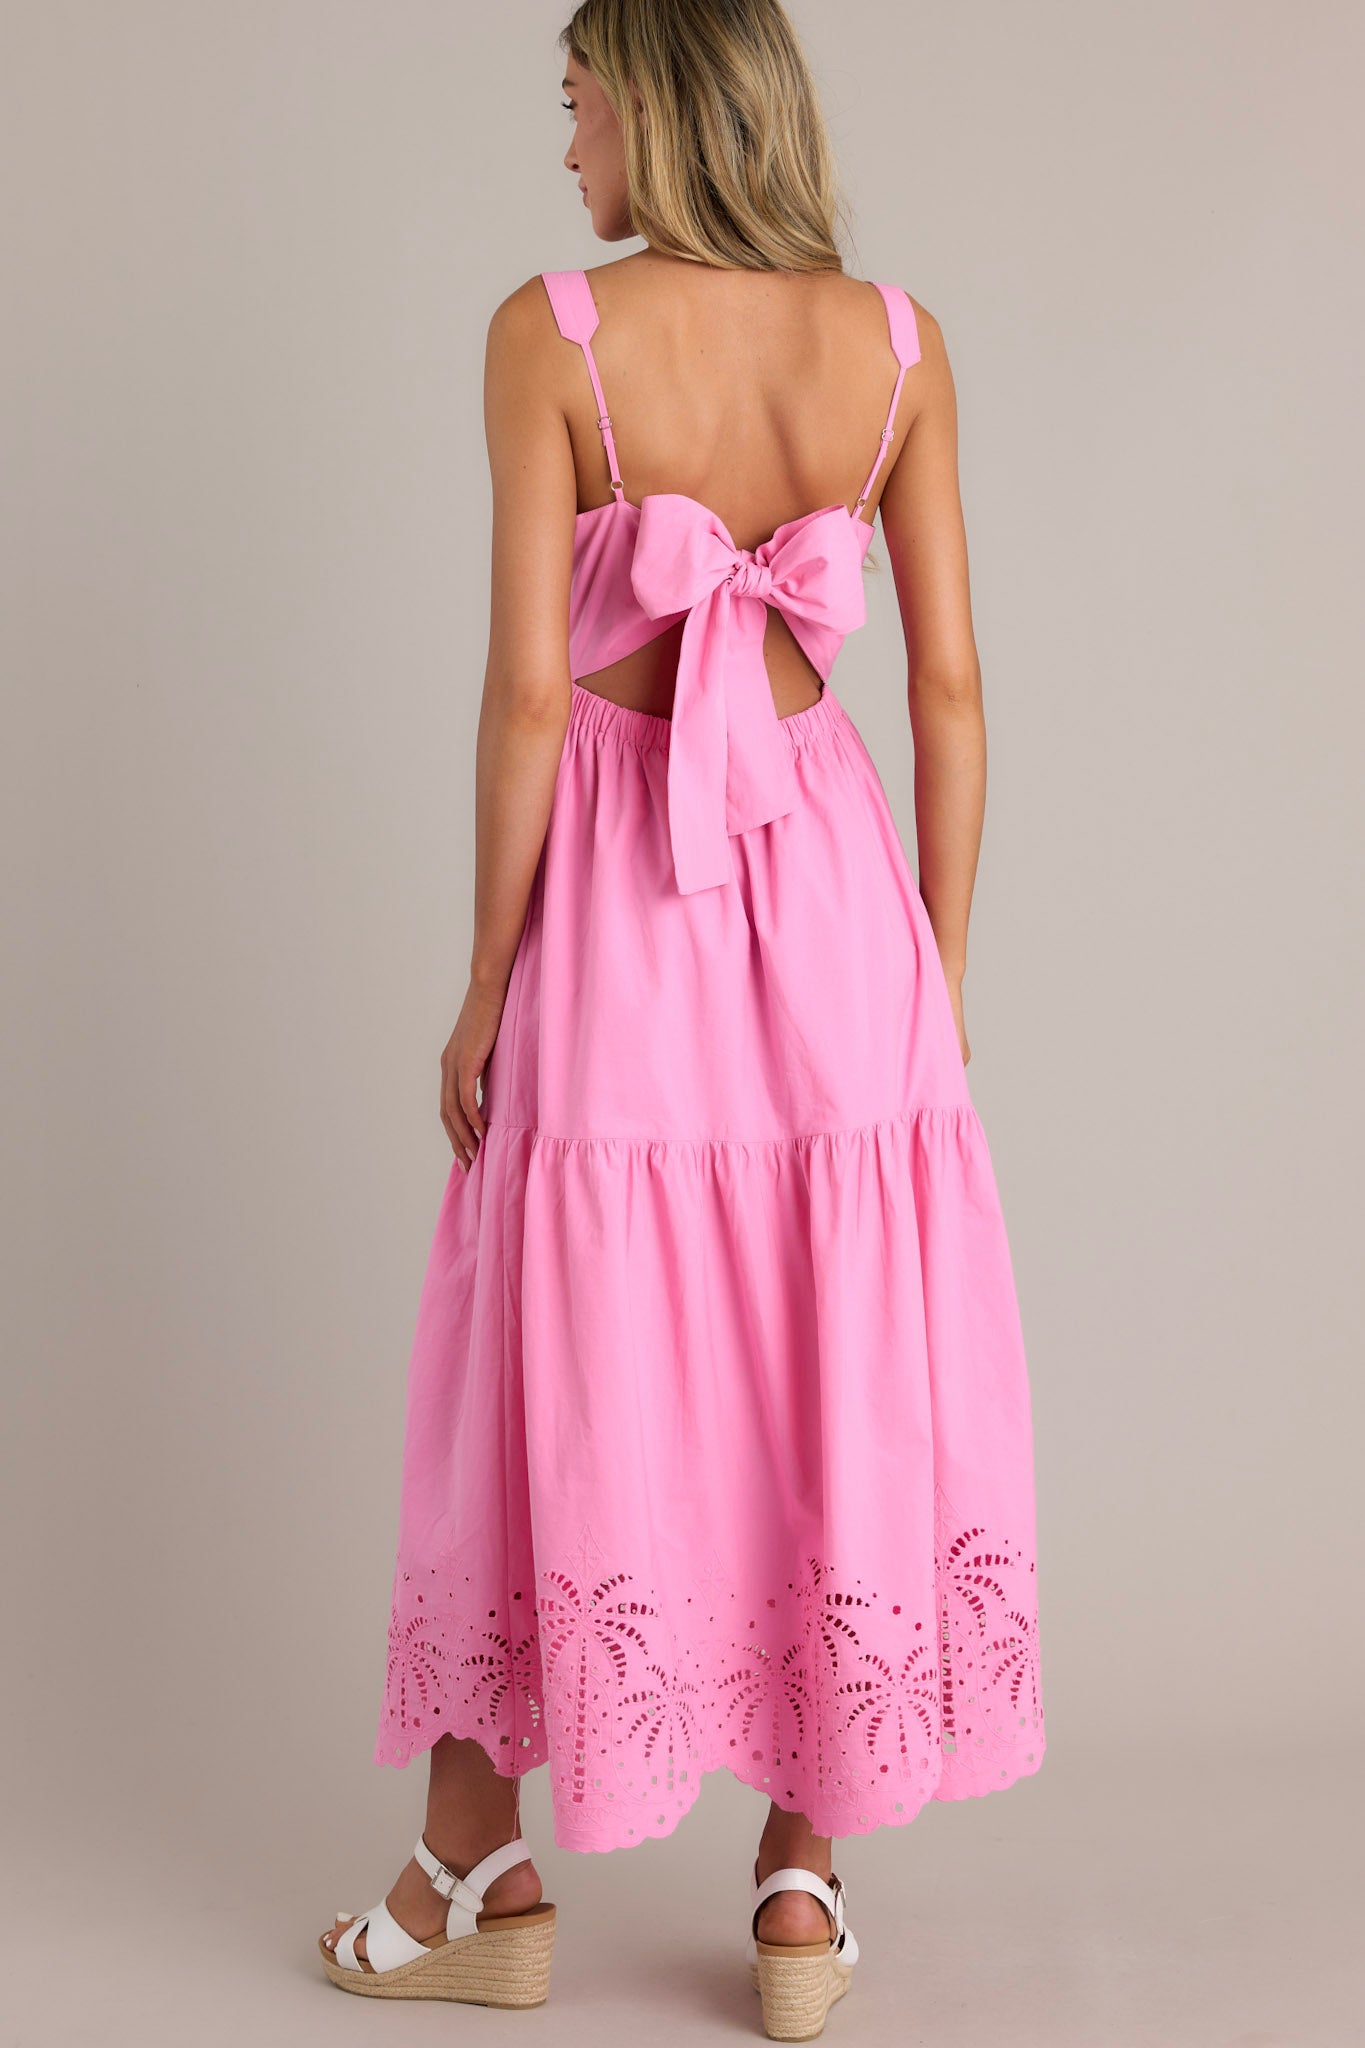 Back view of a pink midi dress highlighting the self-tie back feature, open lower back, and the palm eyelet detailing on the scalloped hemline.